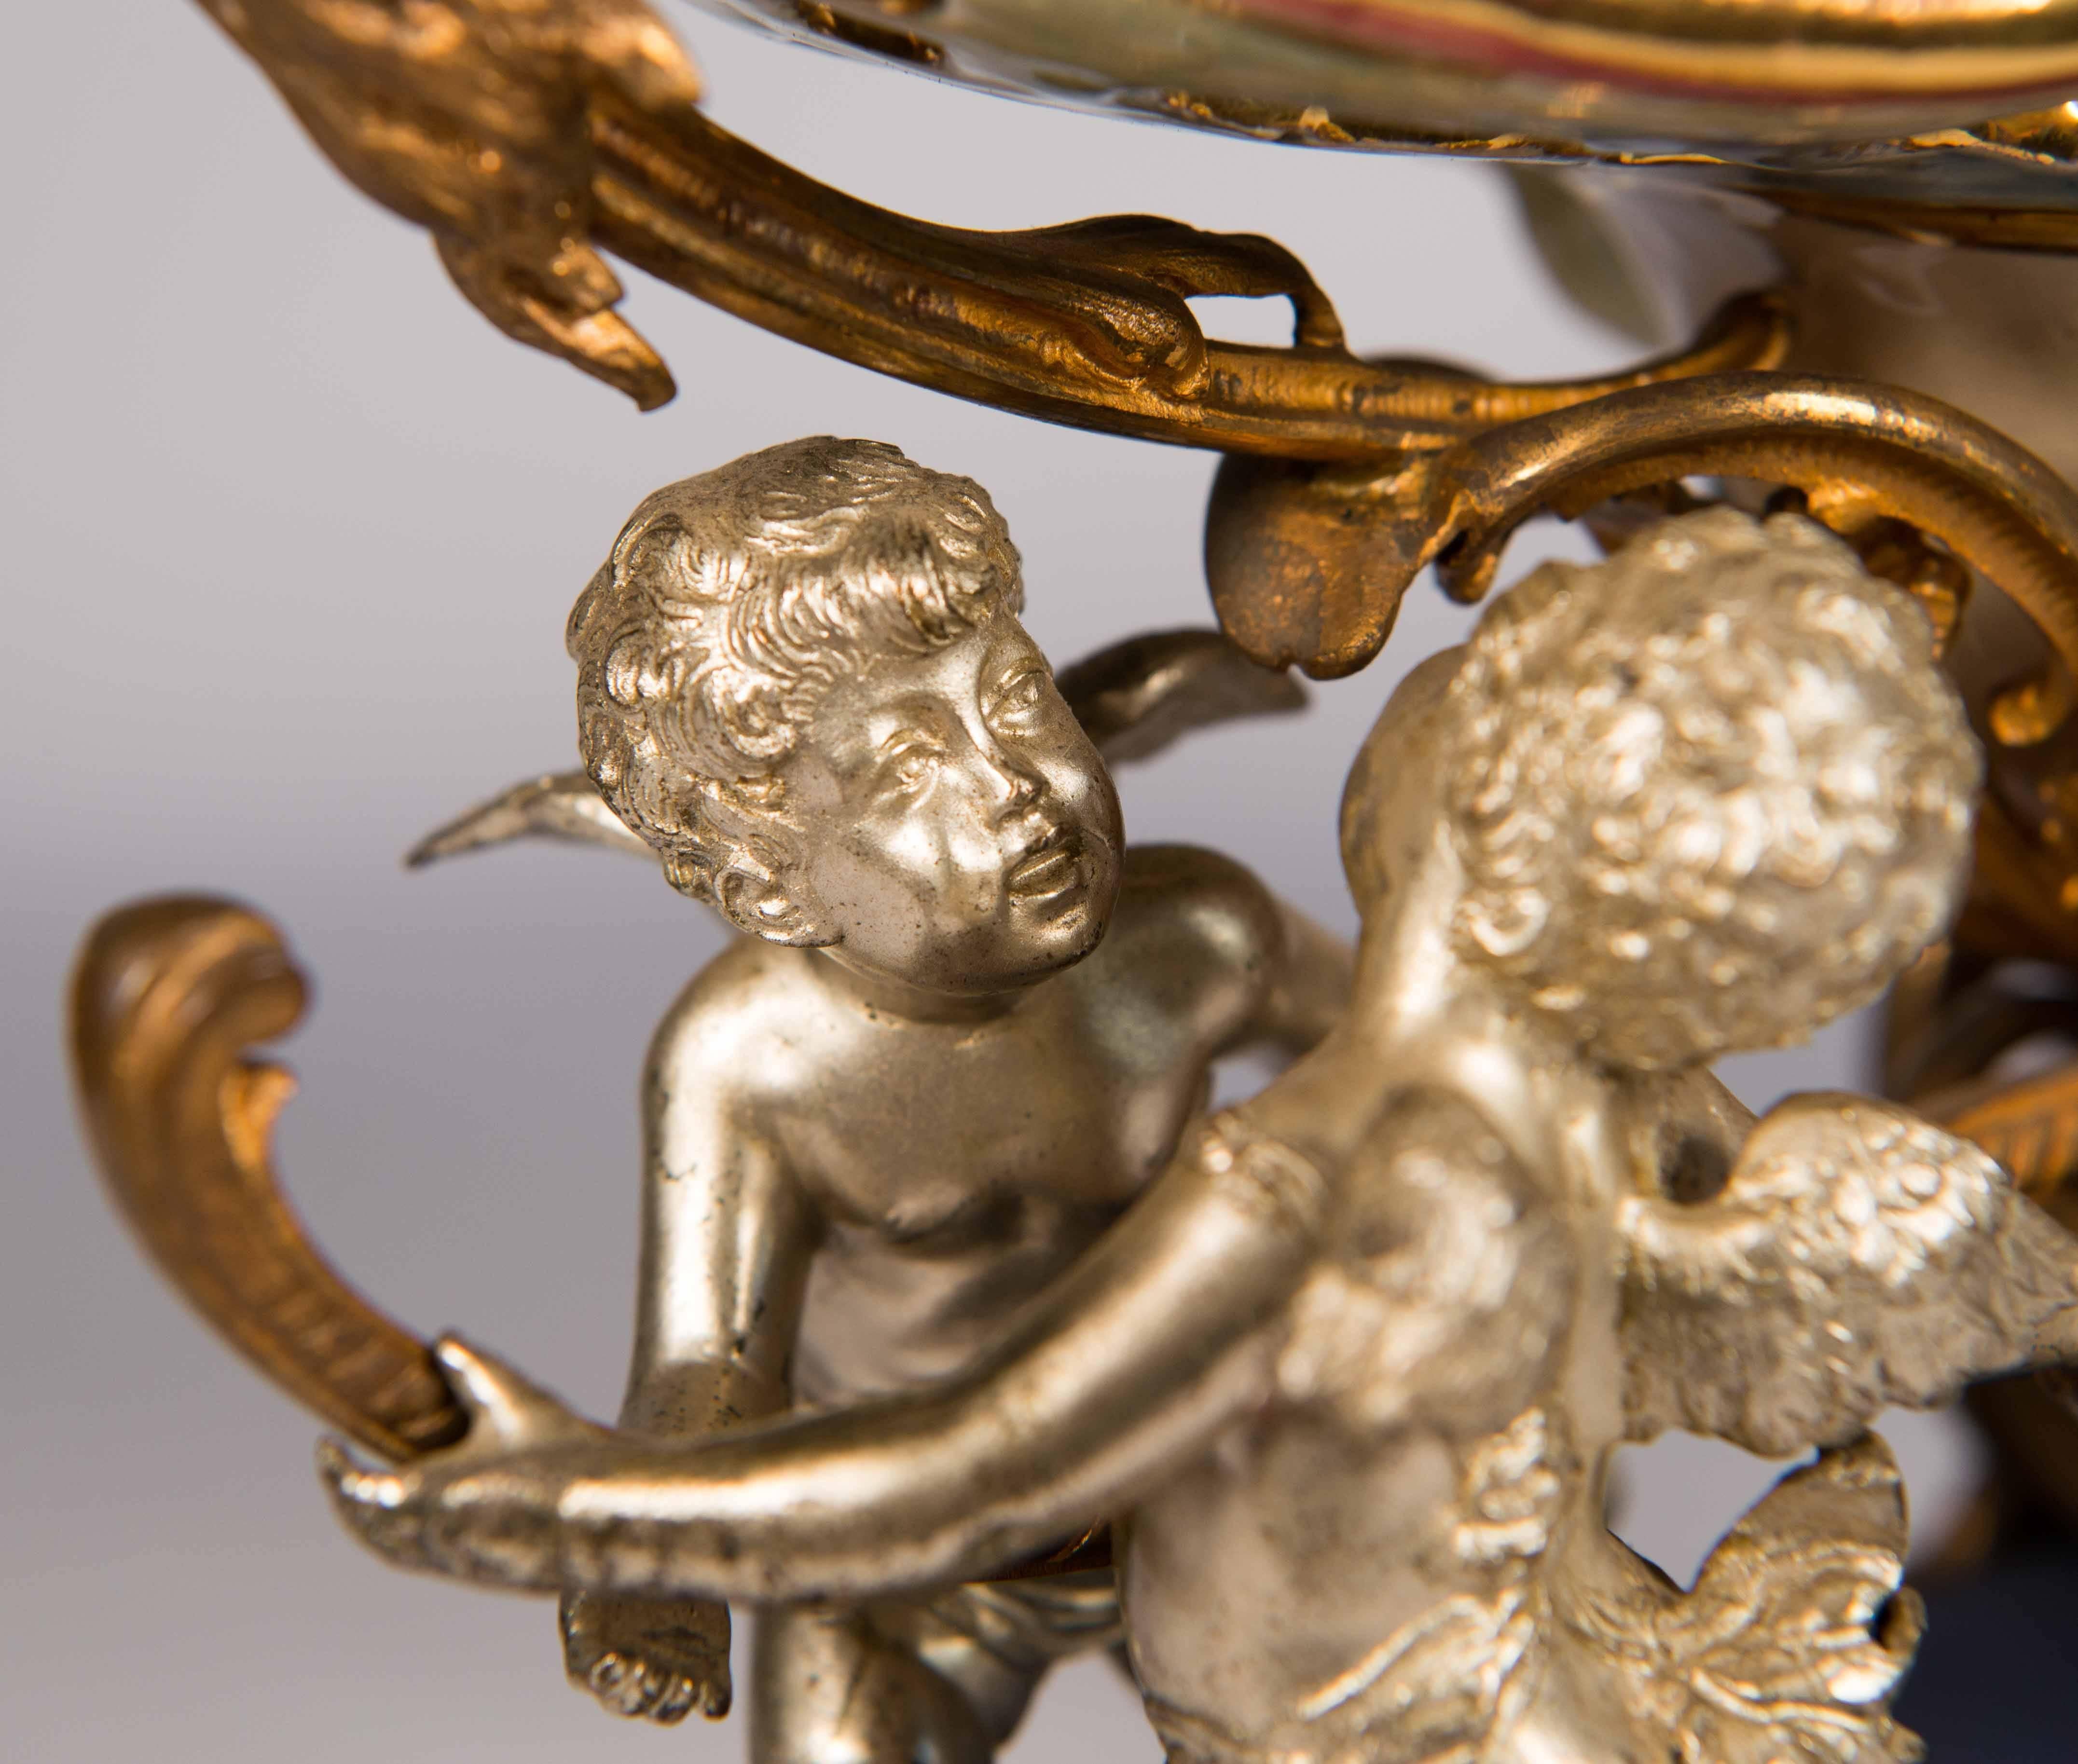 20th Century Hungarian Made Table Centrepiece with Cherubs, Fischer, Budapest